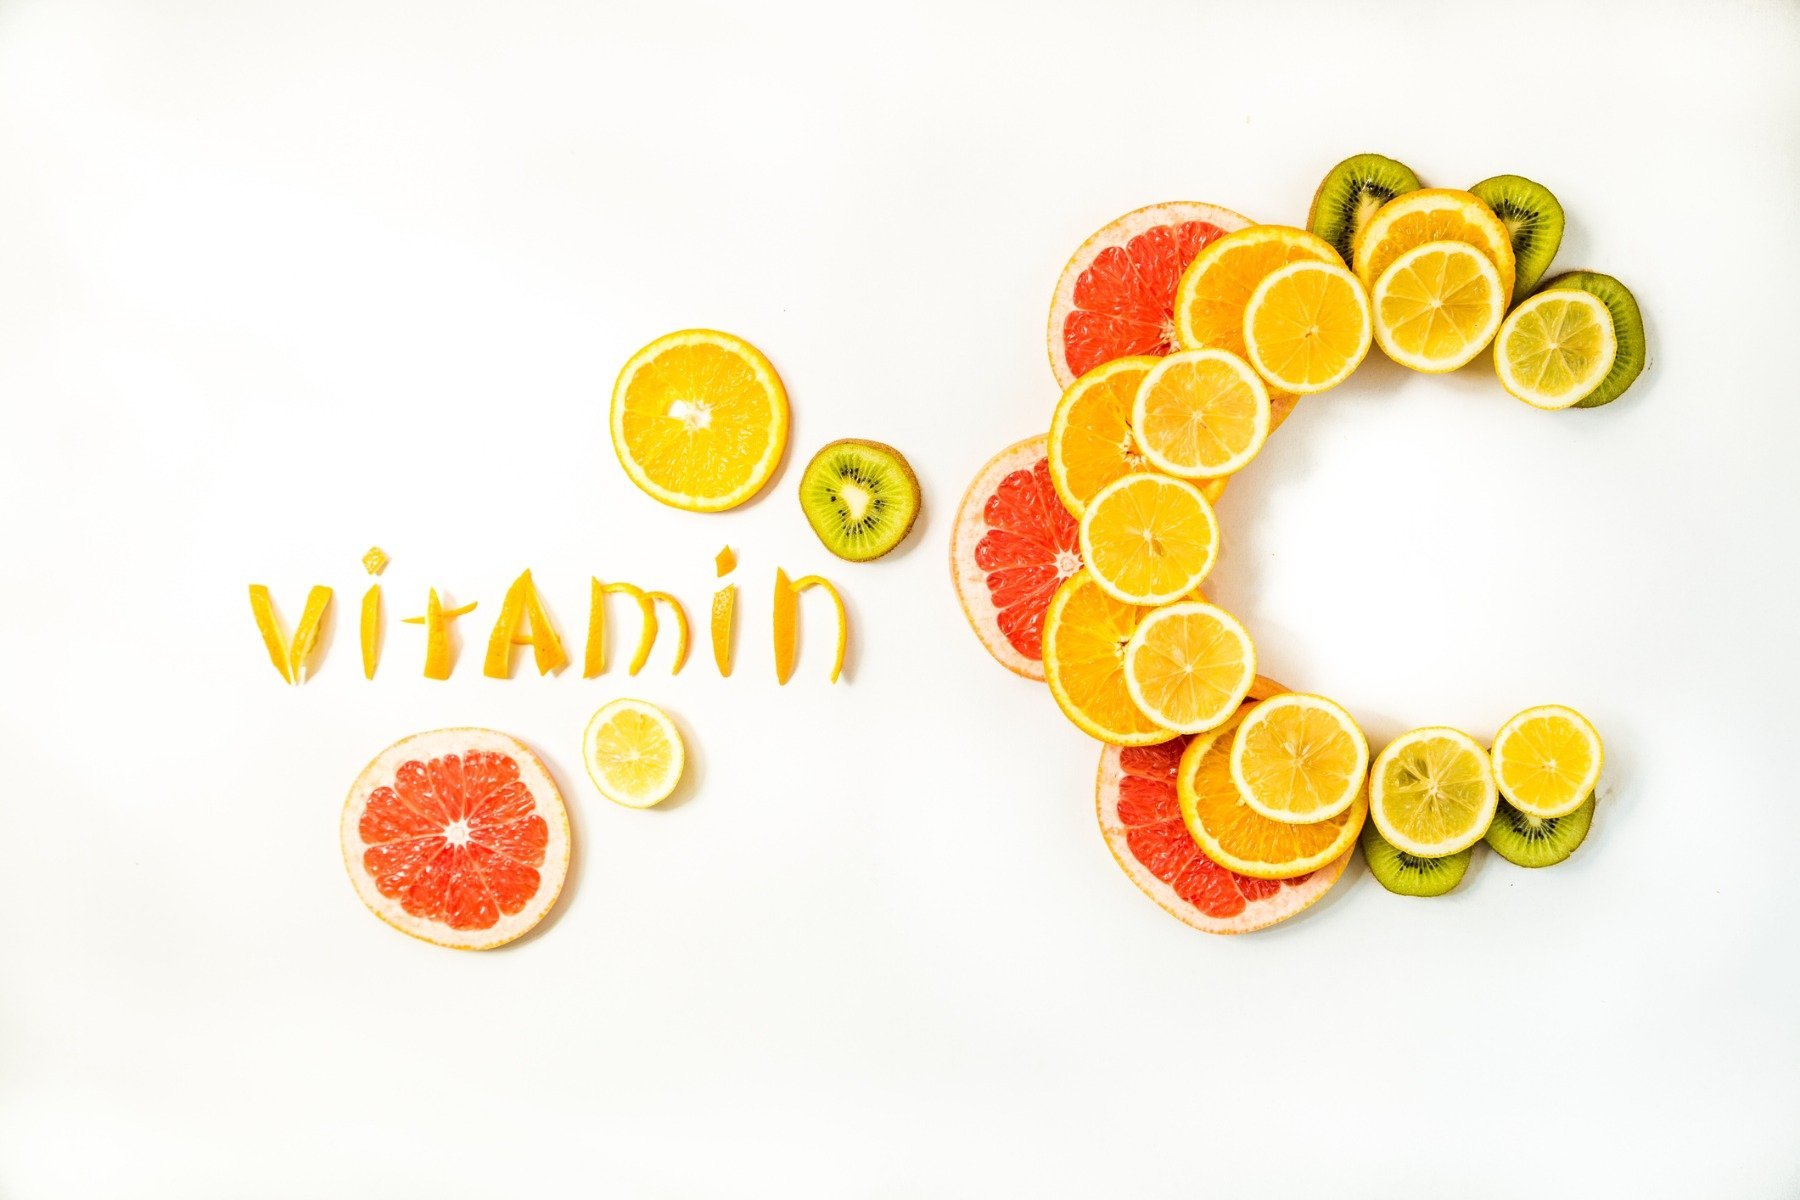 6 nutritional supplements you need during the illness, Vitamin C